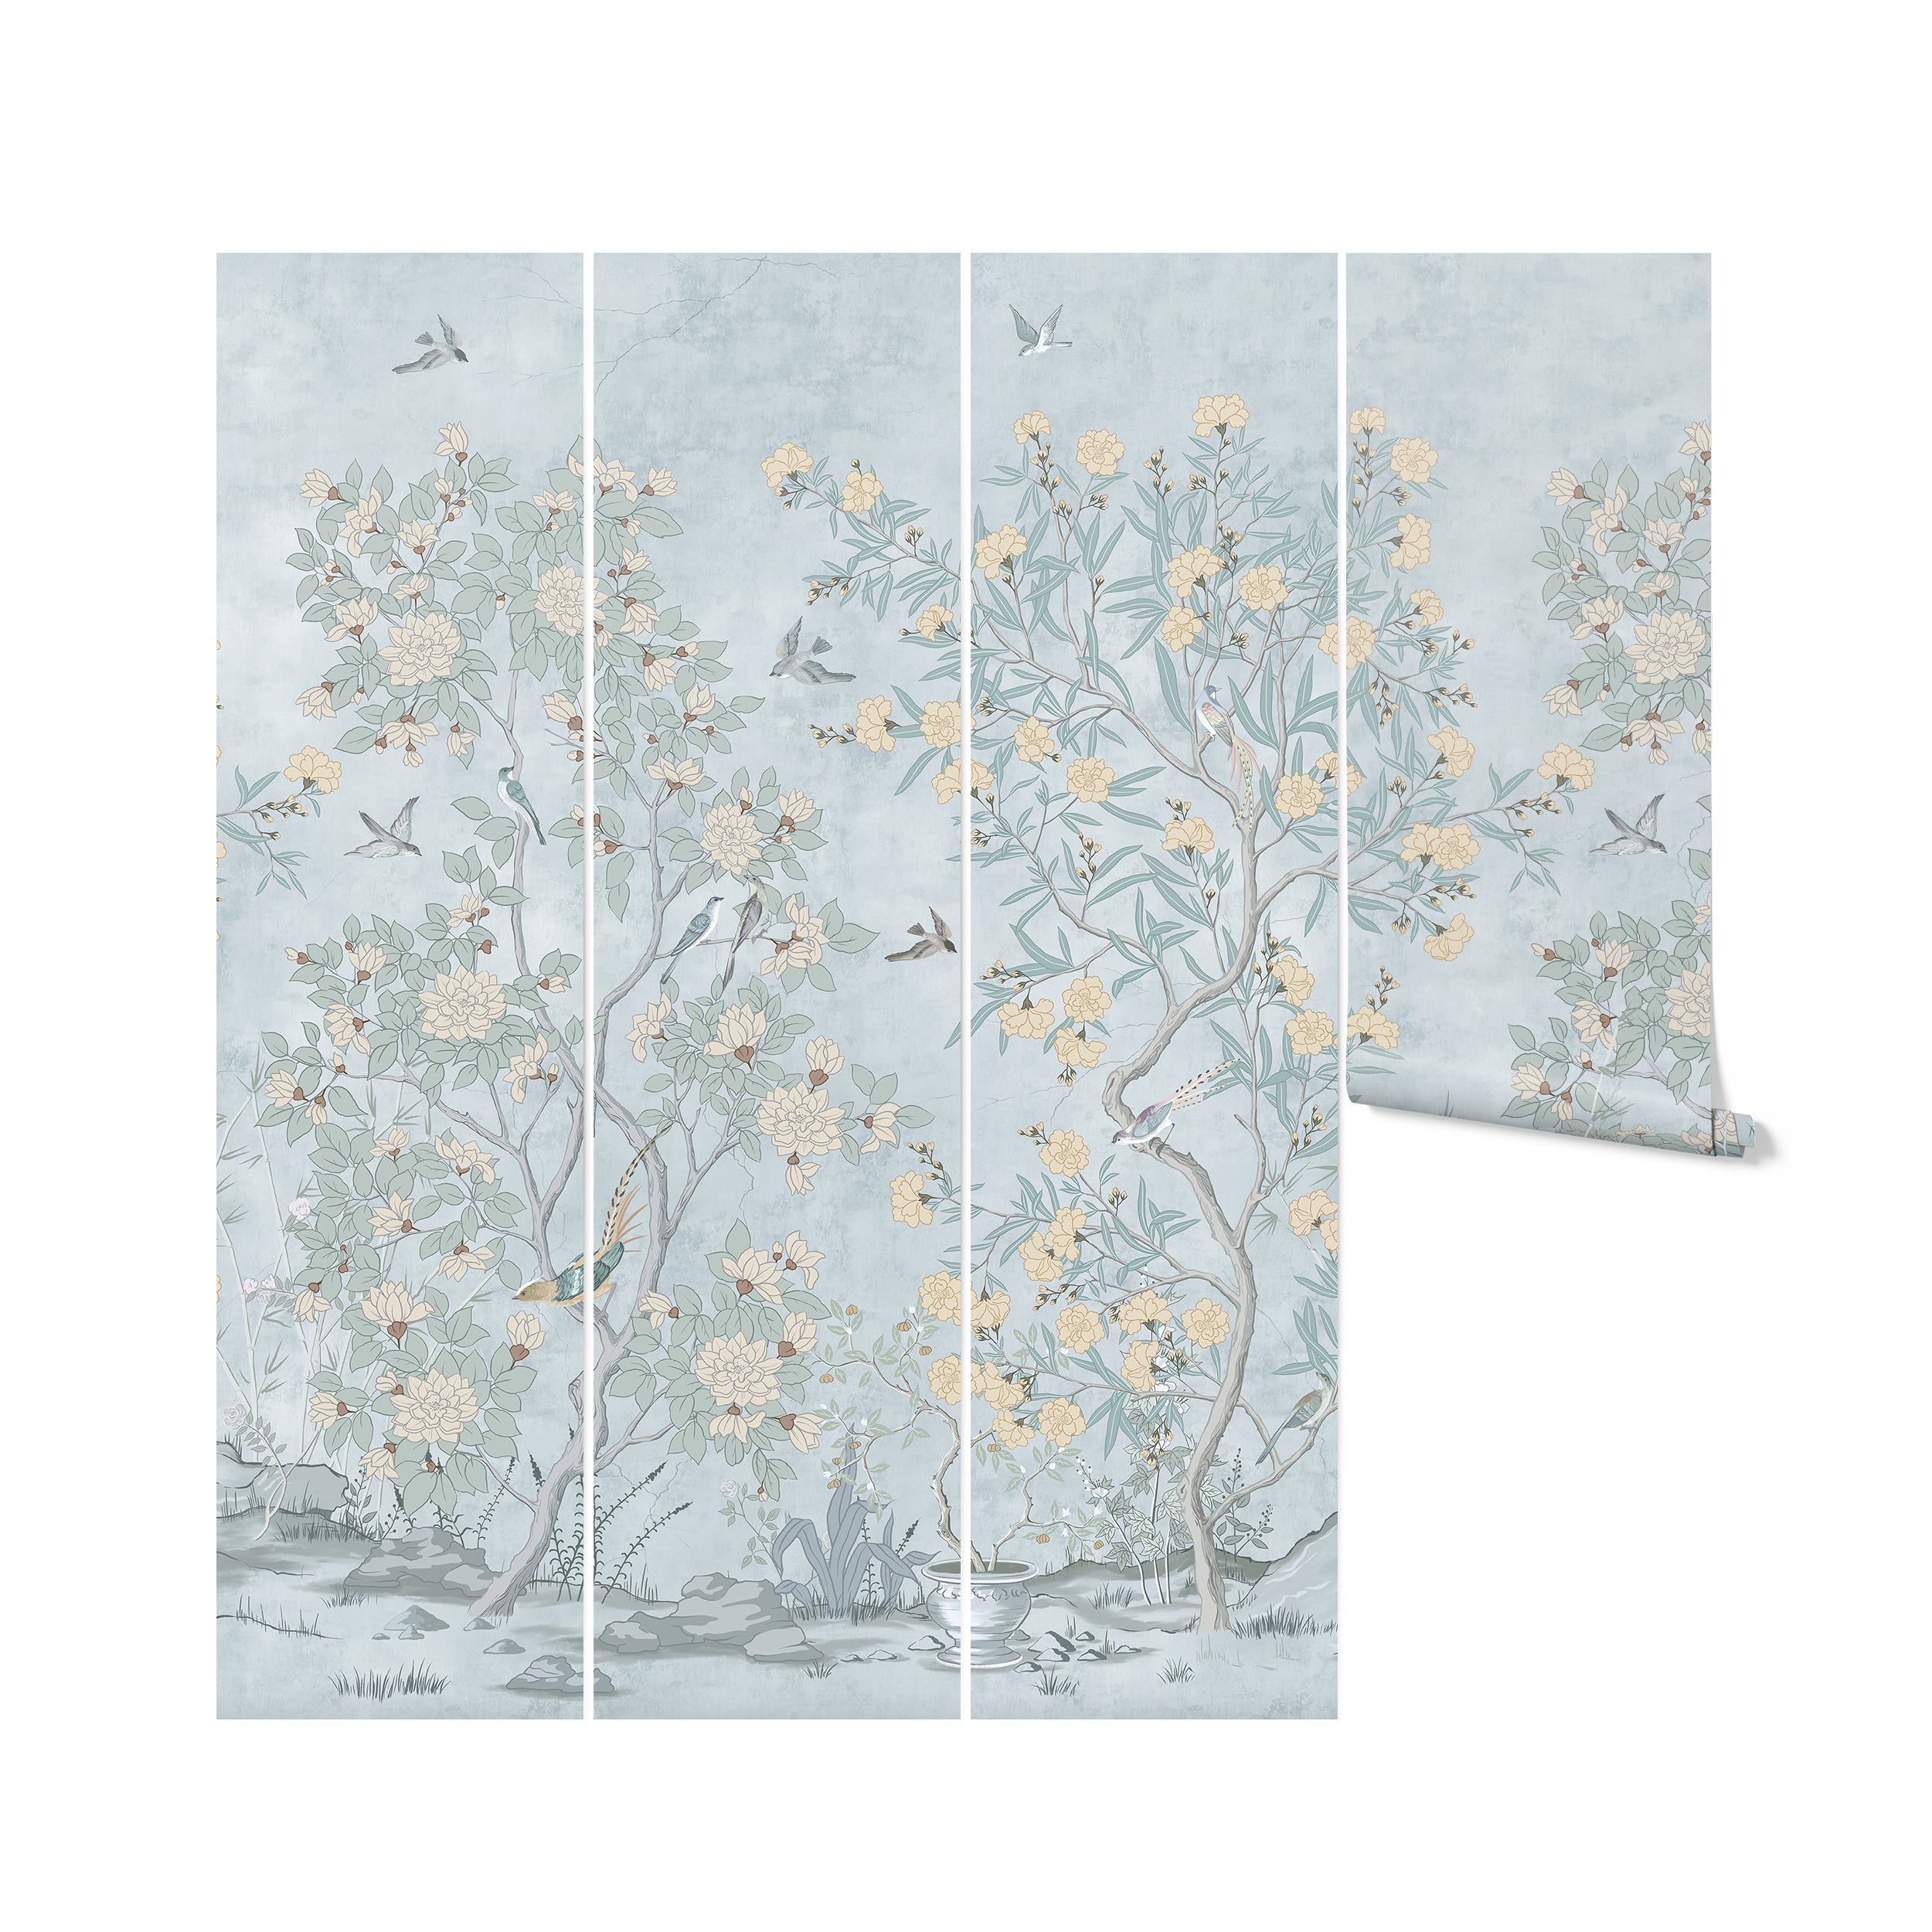 Rolls of chinoiserie wallpaper featuring a sophisticated botanical print with birds. The pattern depicts slender trees with large blooms and leaves in soft hues of green and yellow on a soothing light blue background, creating a serene and elegant design ideal for a calm interior ambiance